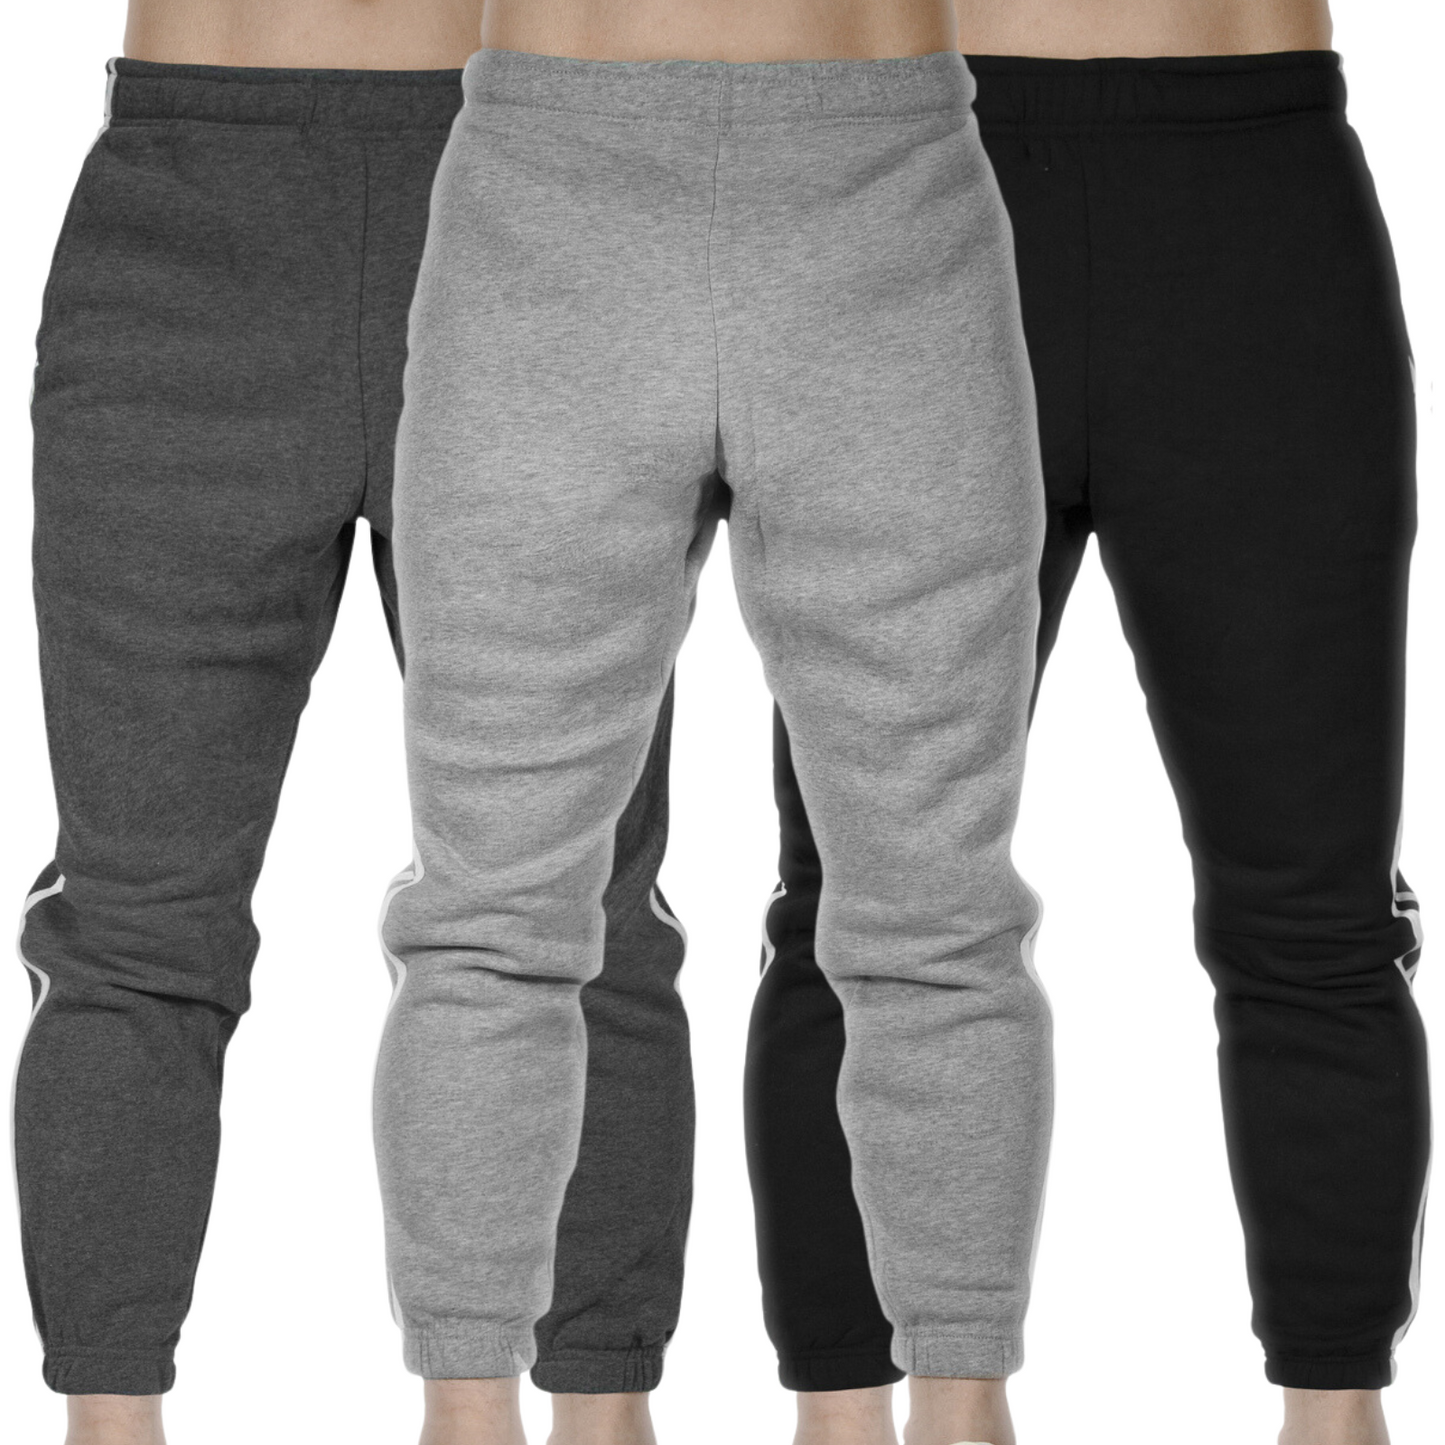 3x Mens Fleece Skinny Track Pants Jogger Gym Casual Sweat Warm - Assorted Colours - L